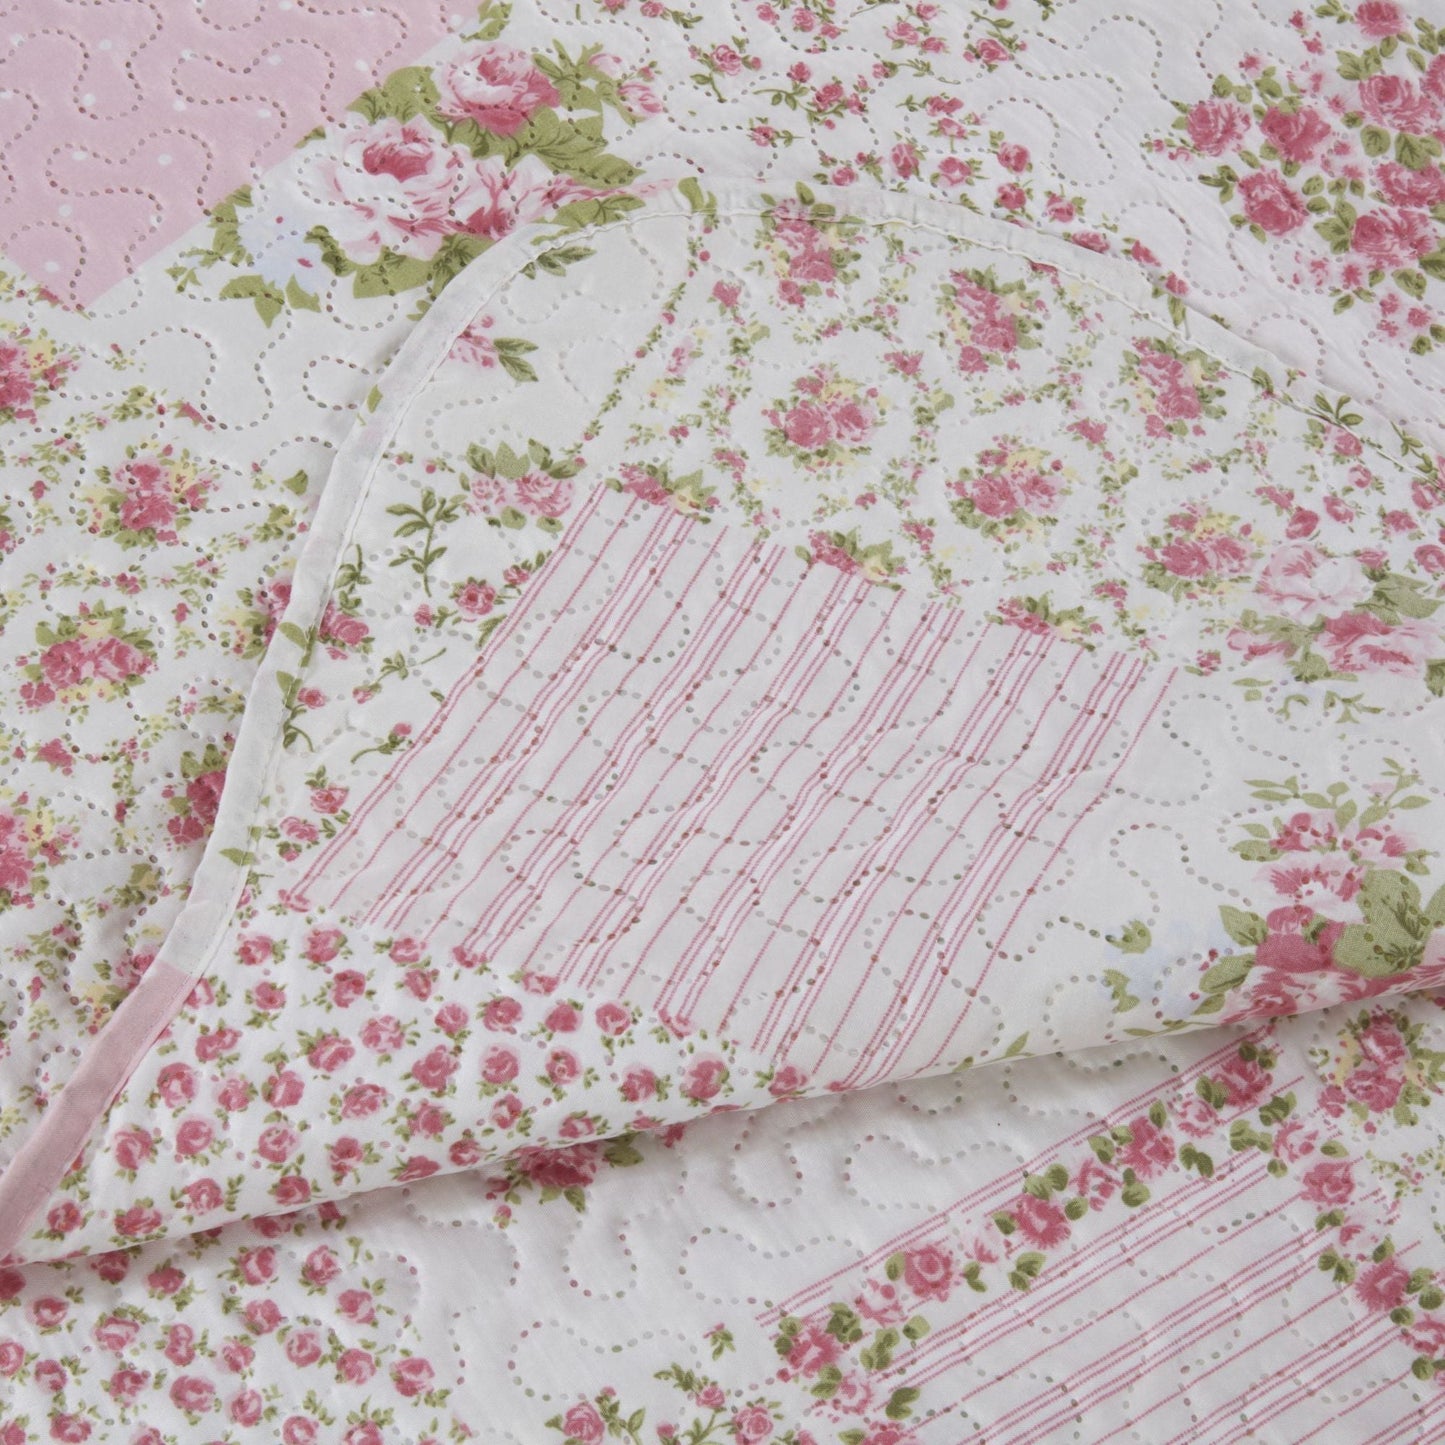 Pink Cotswold Quilted Patchwork Bedspread Set